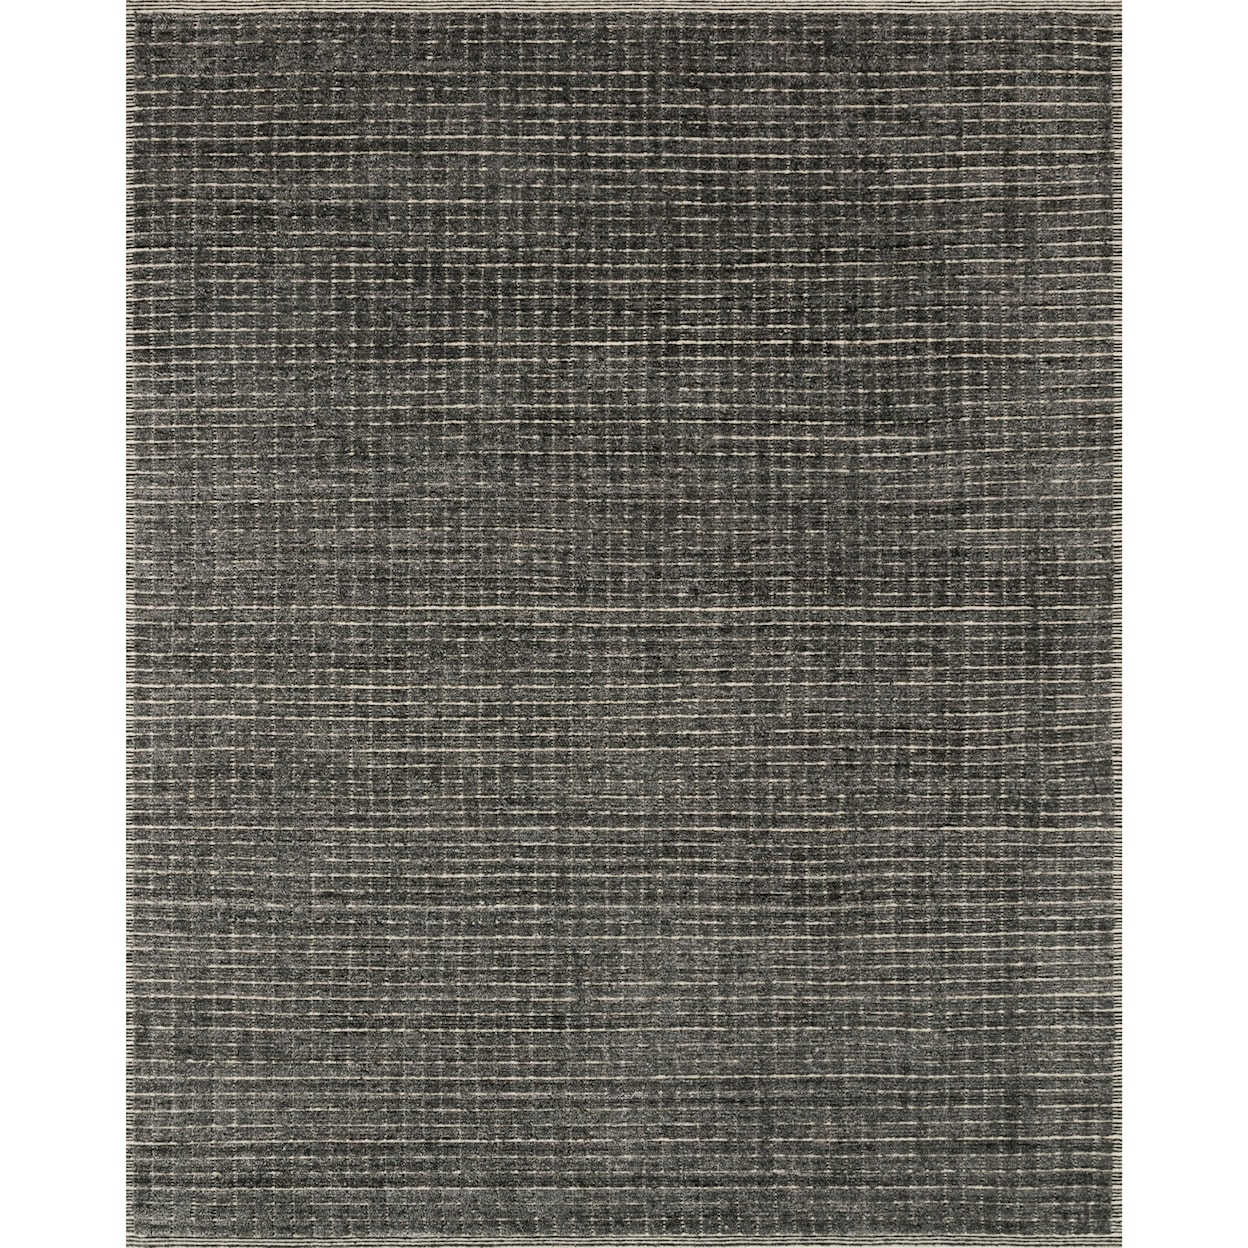 Reeds Rugs Beverly 8'6" x 11'6" Charcoal Rug